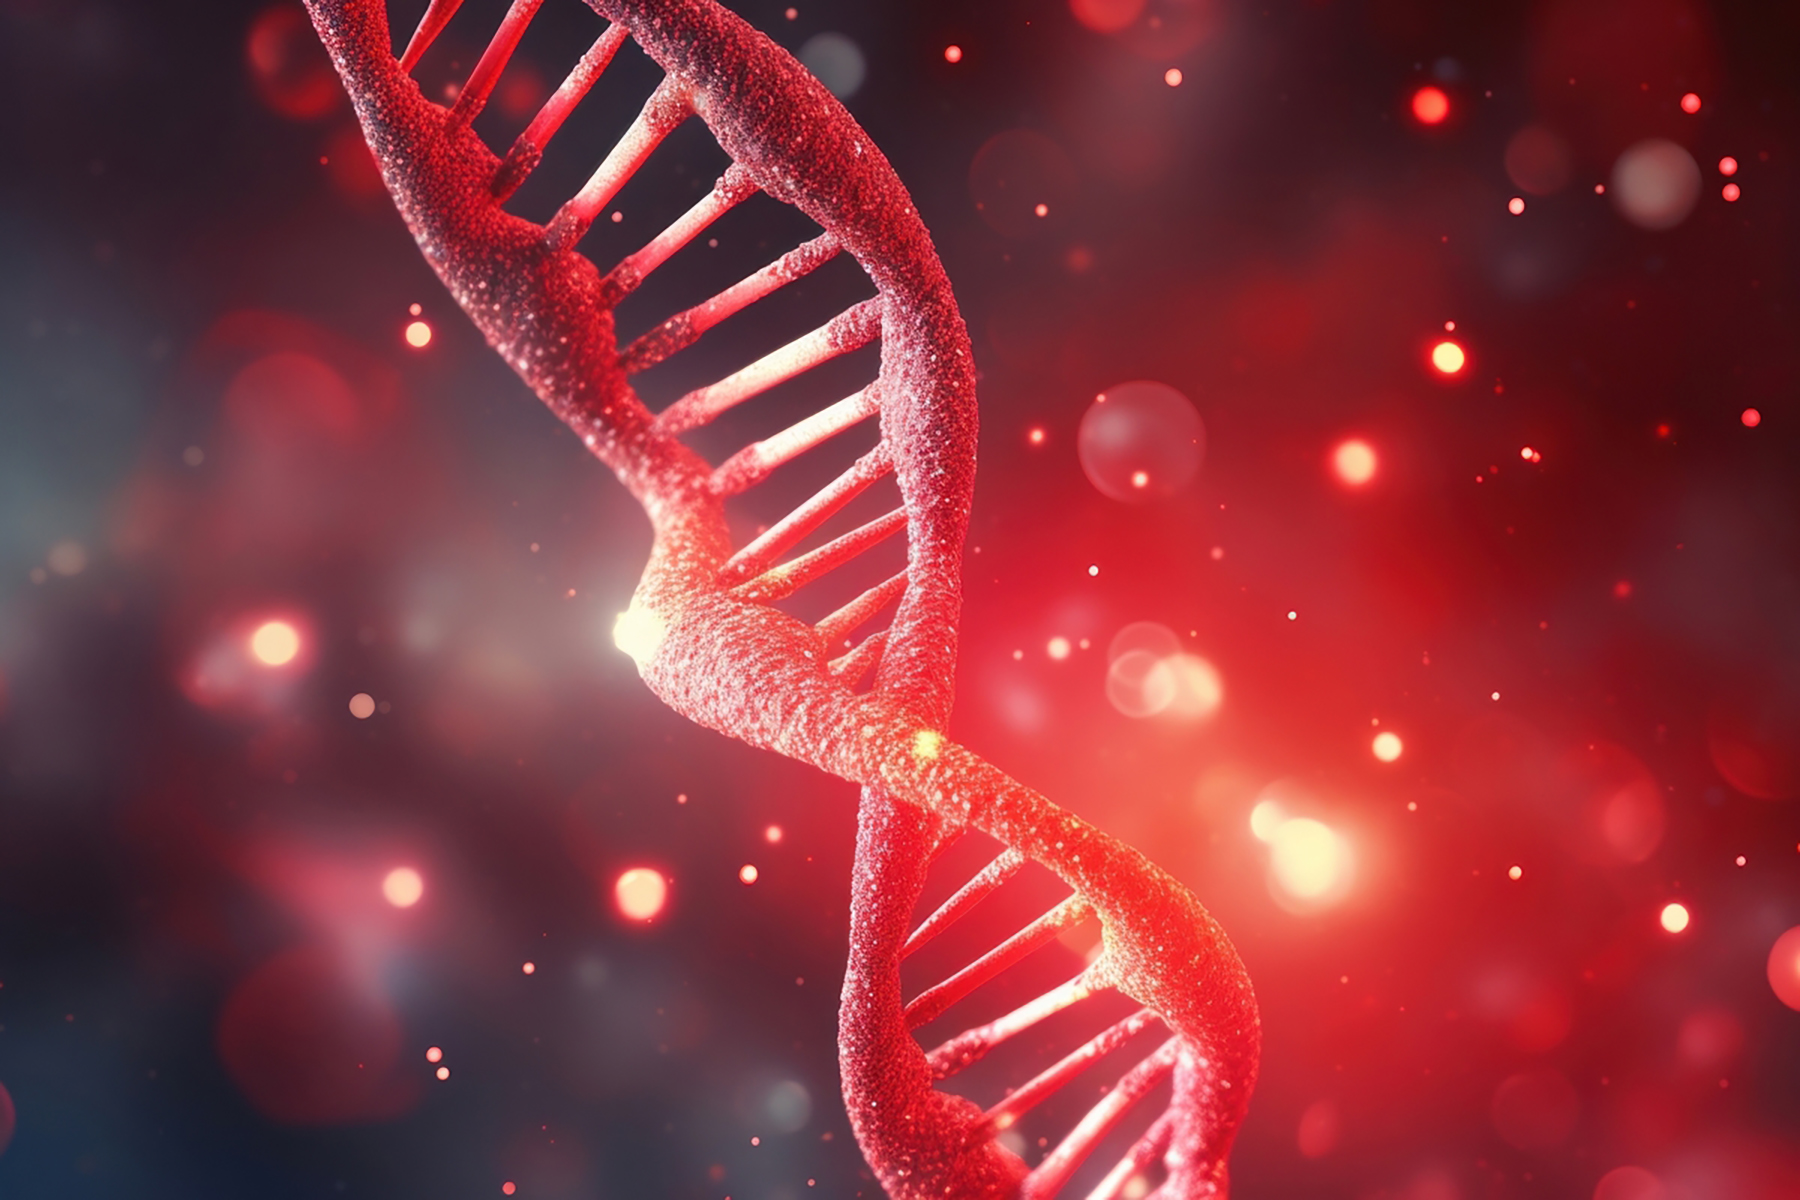 A rendered image of DNA on a red background